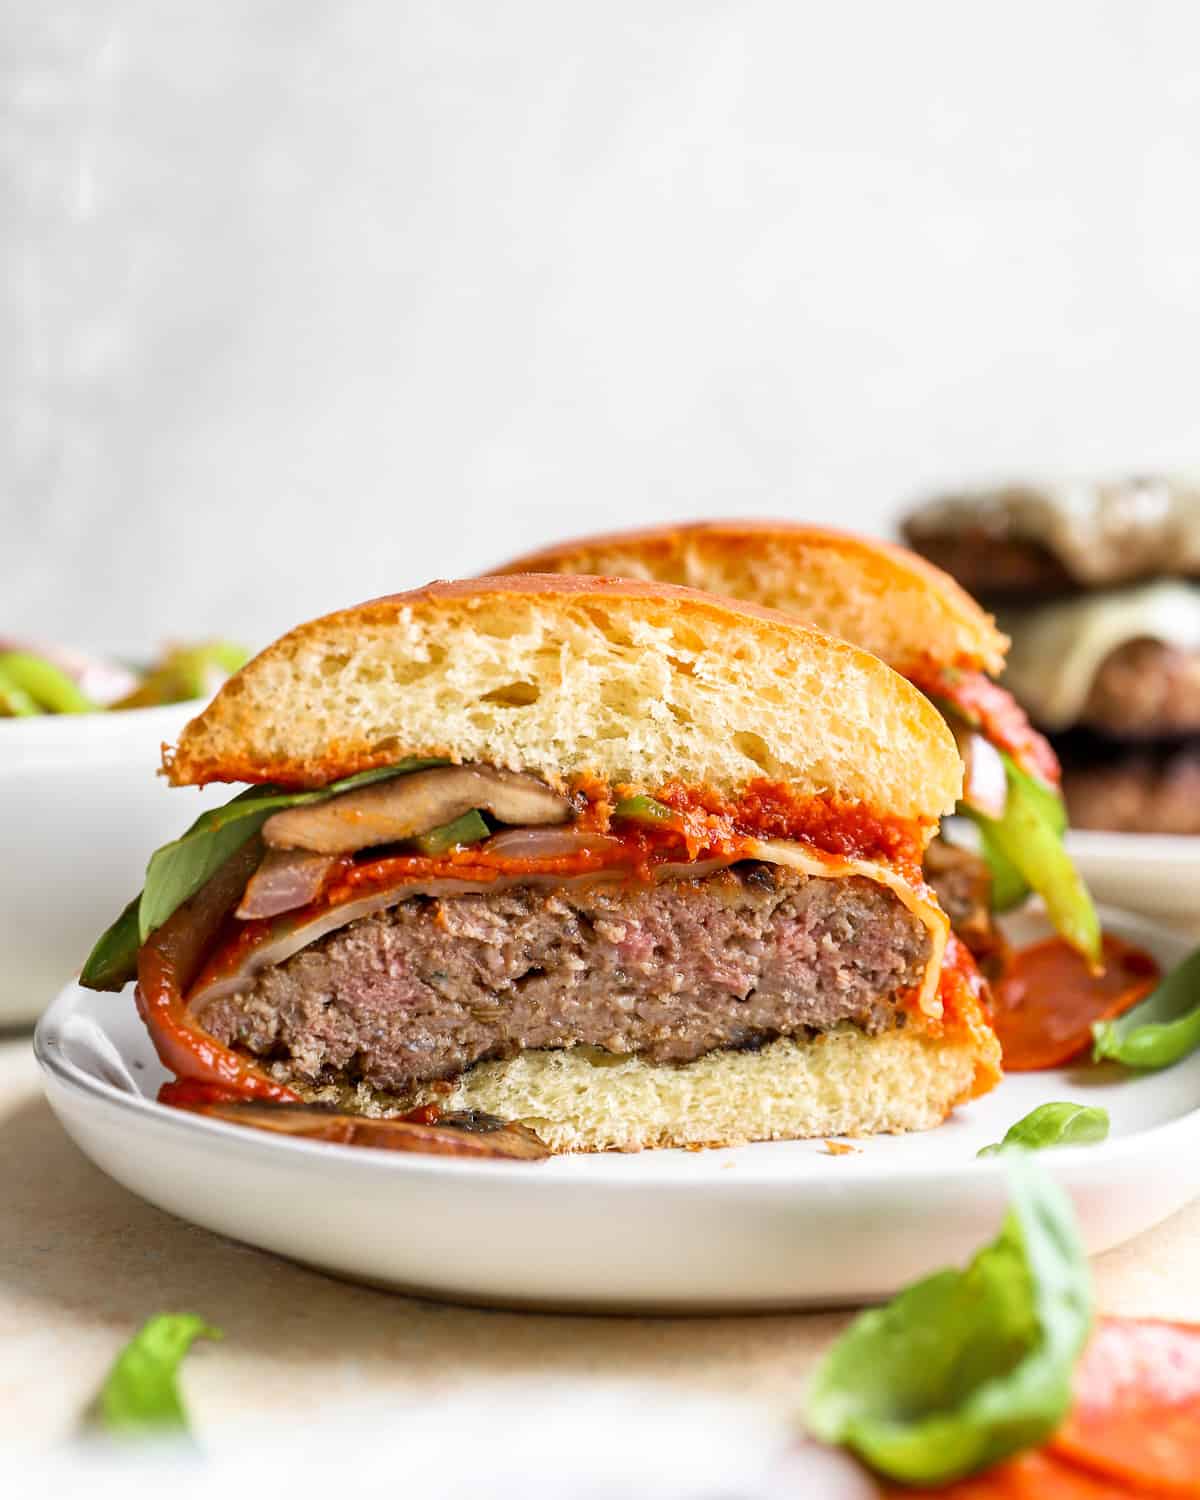 a beef and Italian sausage burger cut in half on a plate.